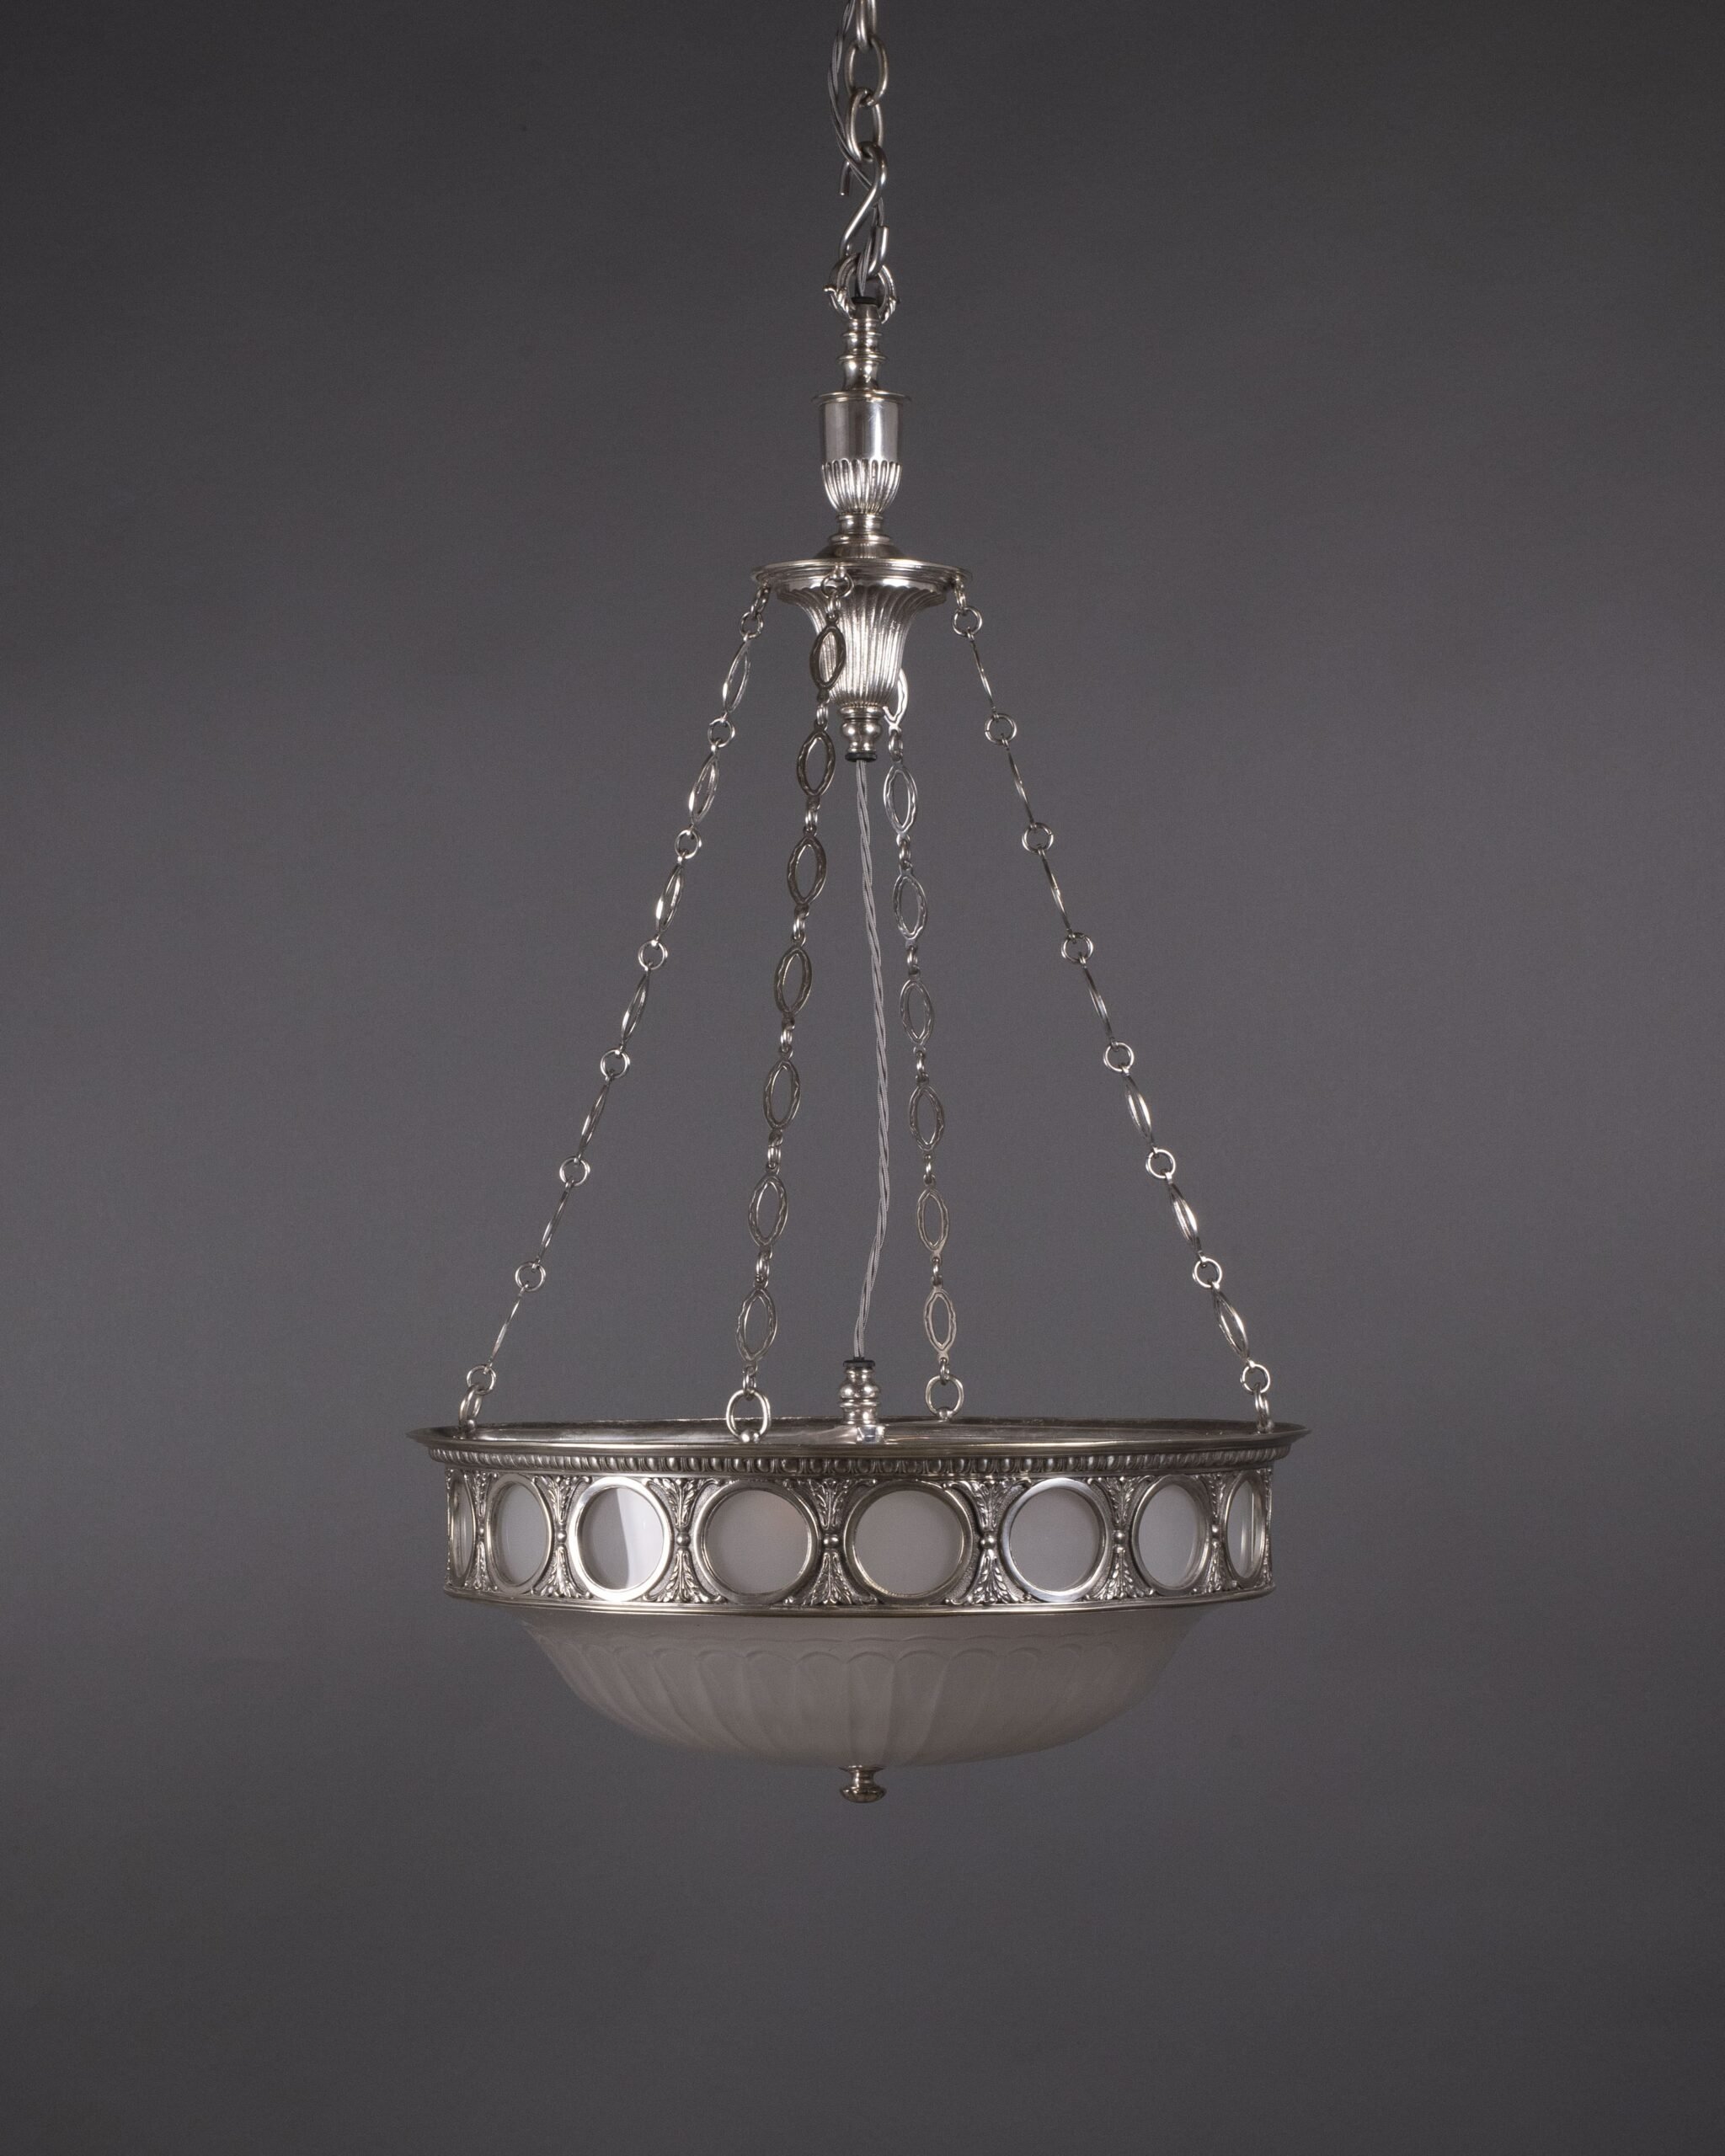 F&C Osler Antique Ceiling Light with Satin Glass Bowl 2